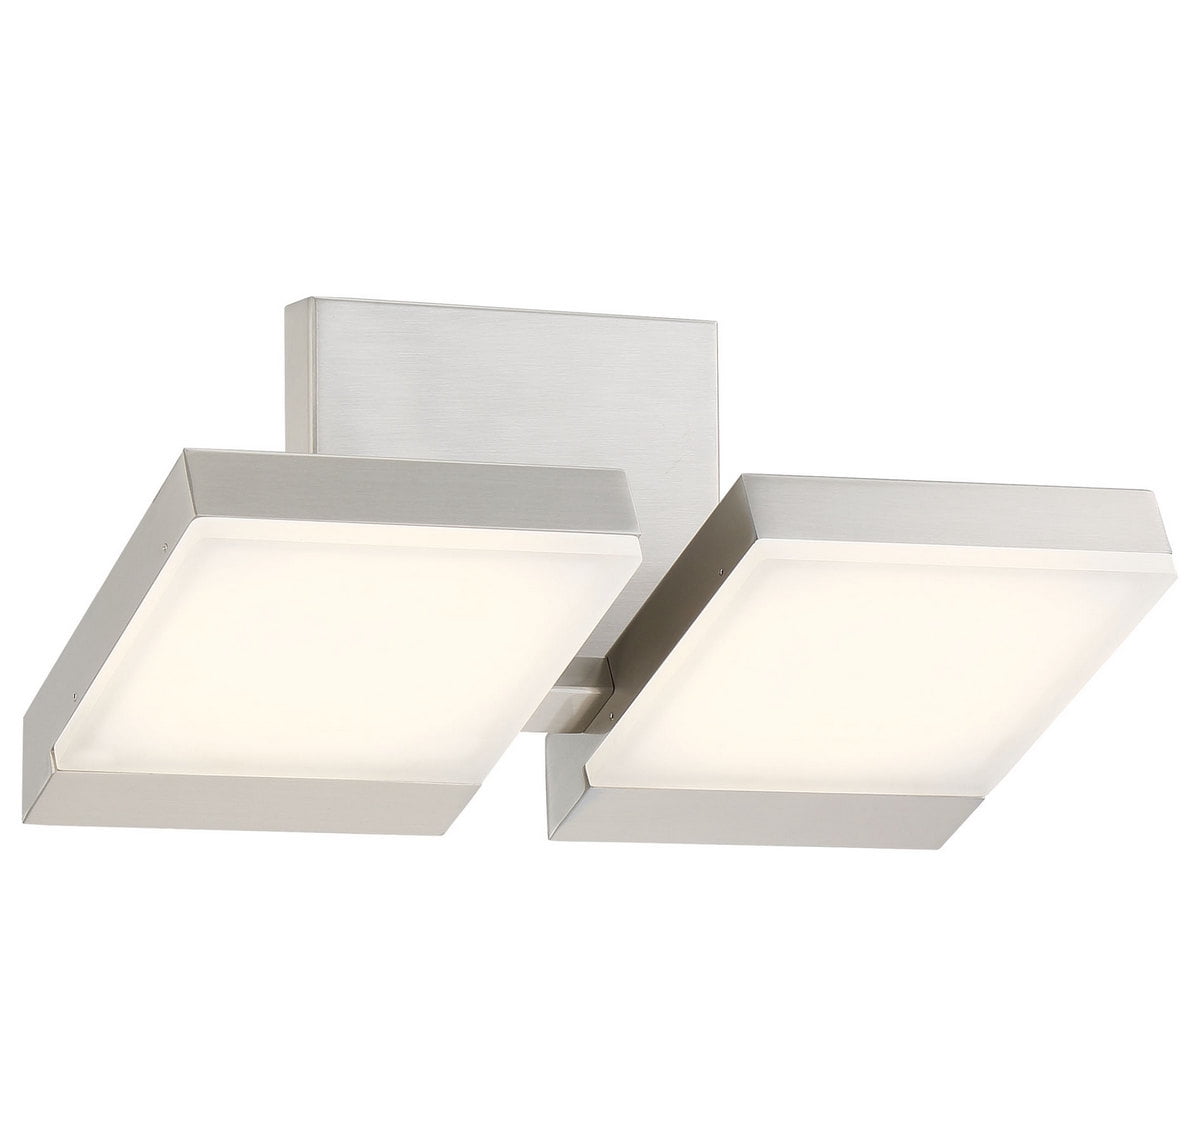 George Kovacs Angle 2-Light LED Wall-Mount Bath Fixture in Brushed Nickel  with Glass Shade